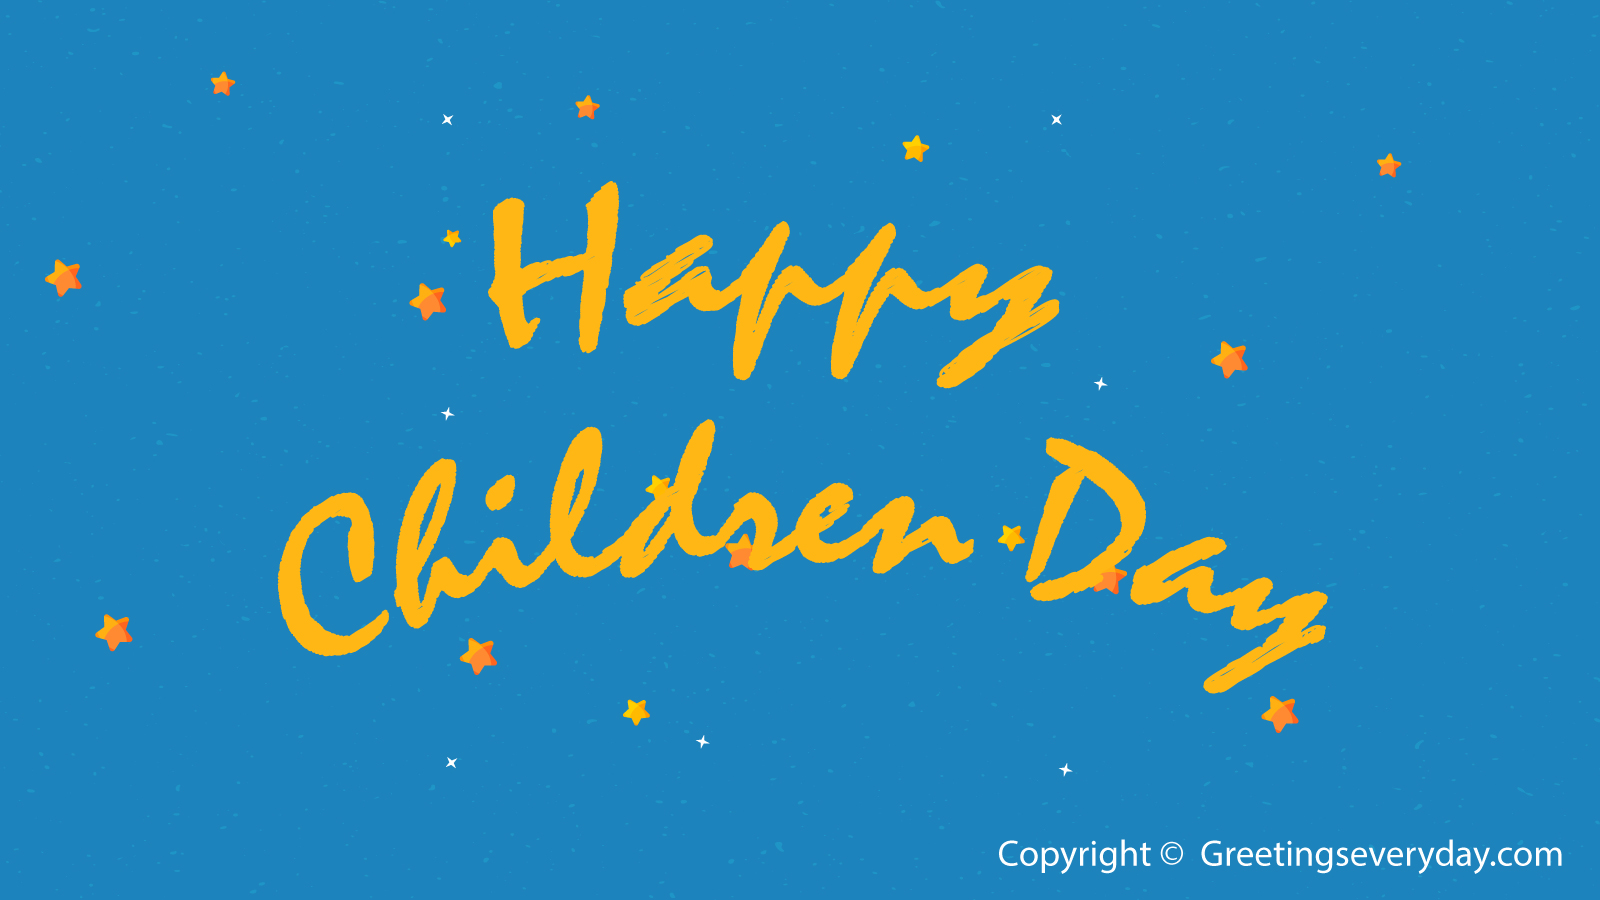 Children's Day Images 2017